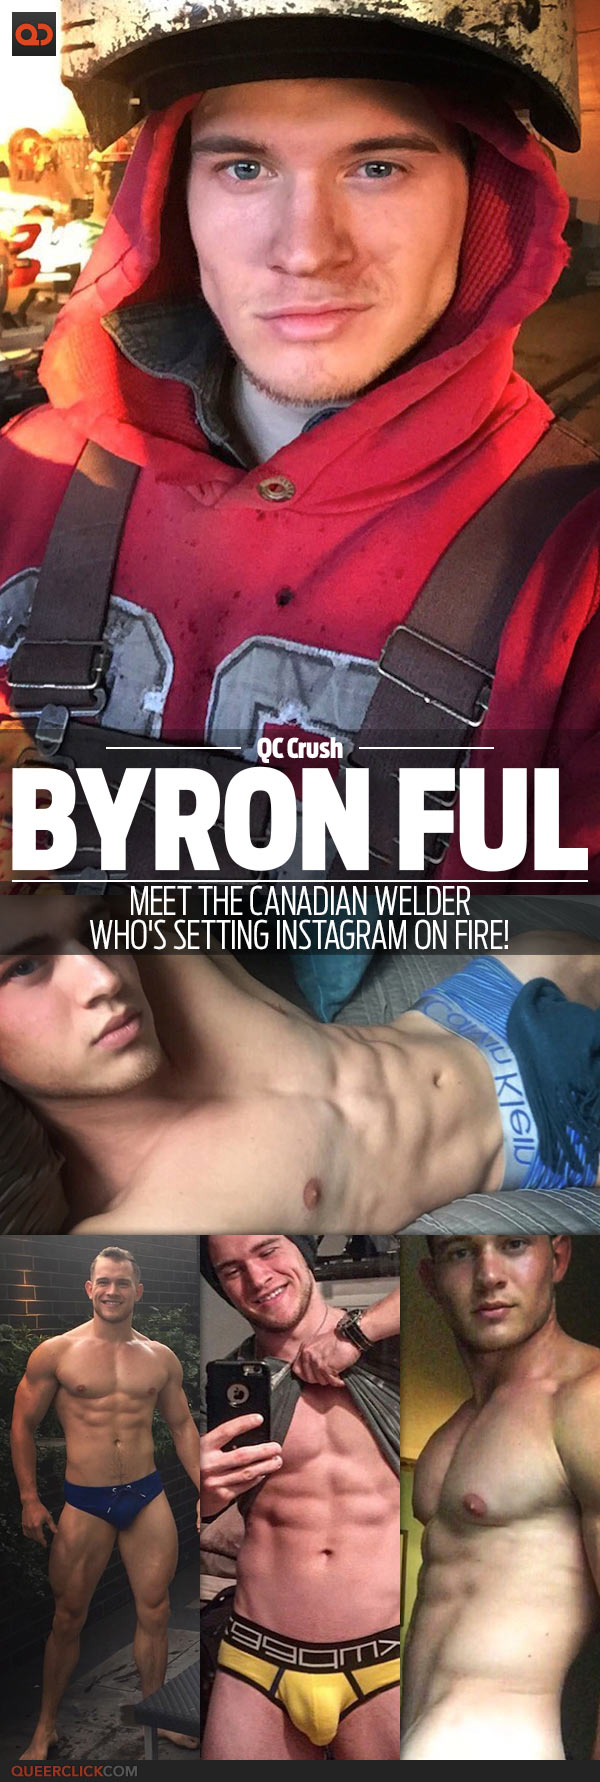 Byron “Ful”, The Canadian Welder Who's Setting Instagram On Fire!